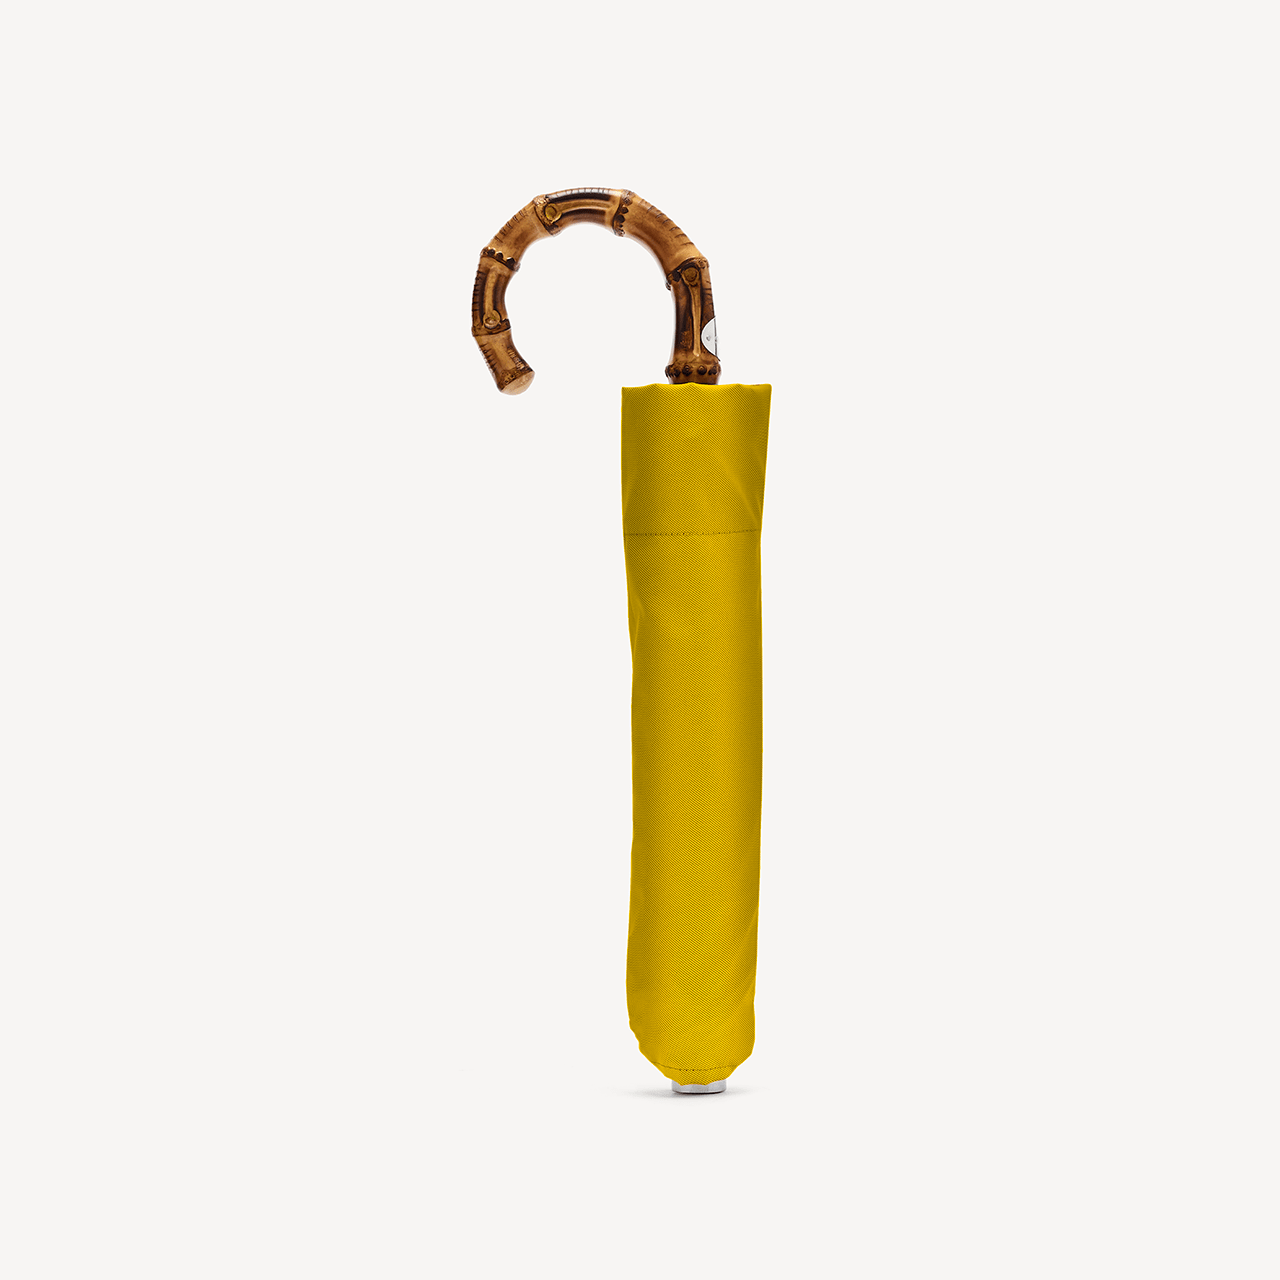 Collapsible Umbrella with Whangee Handle - Mustard - Swaine